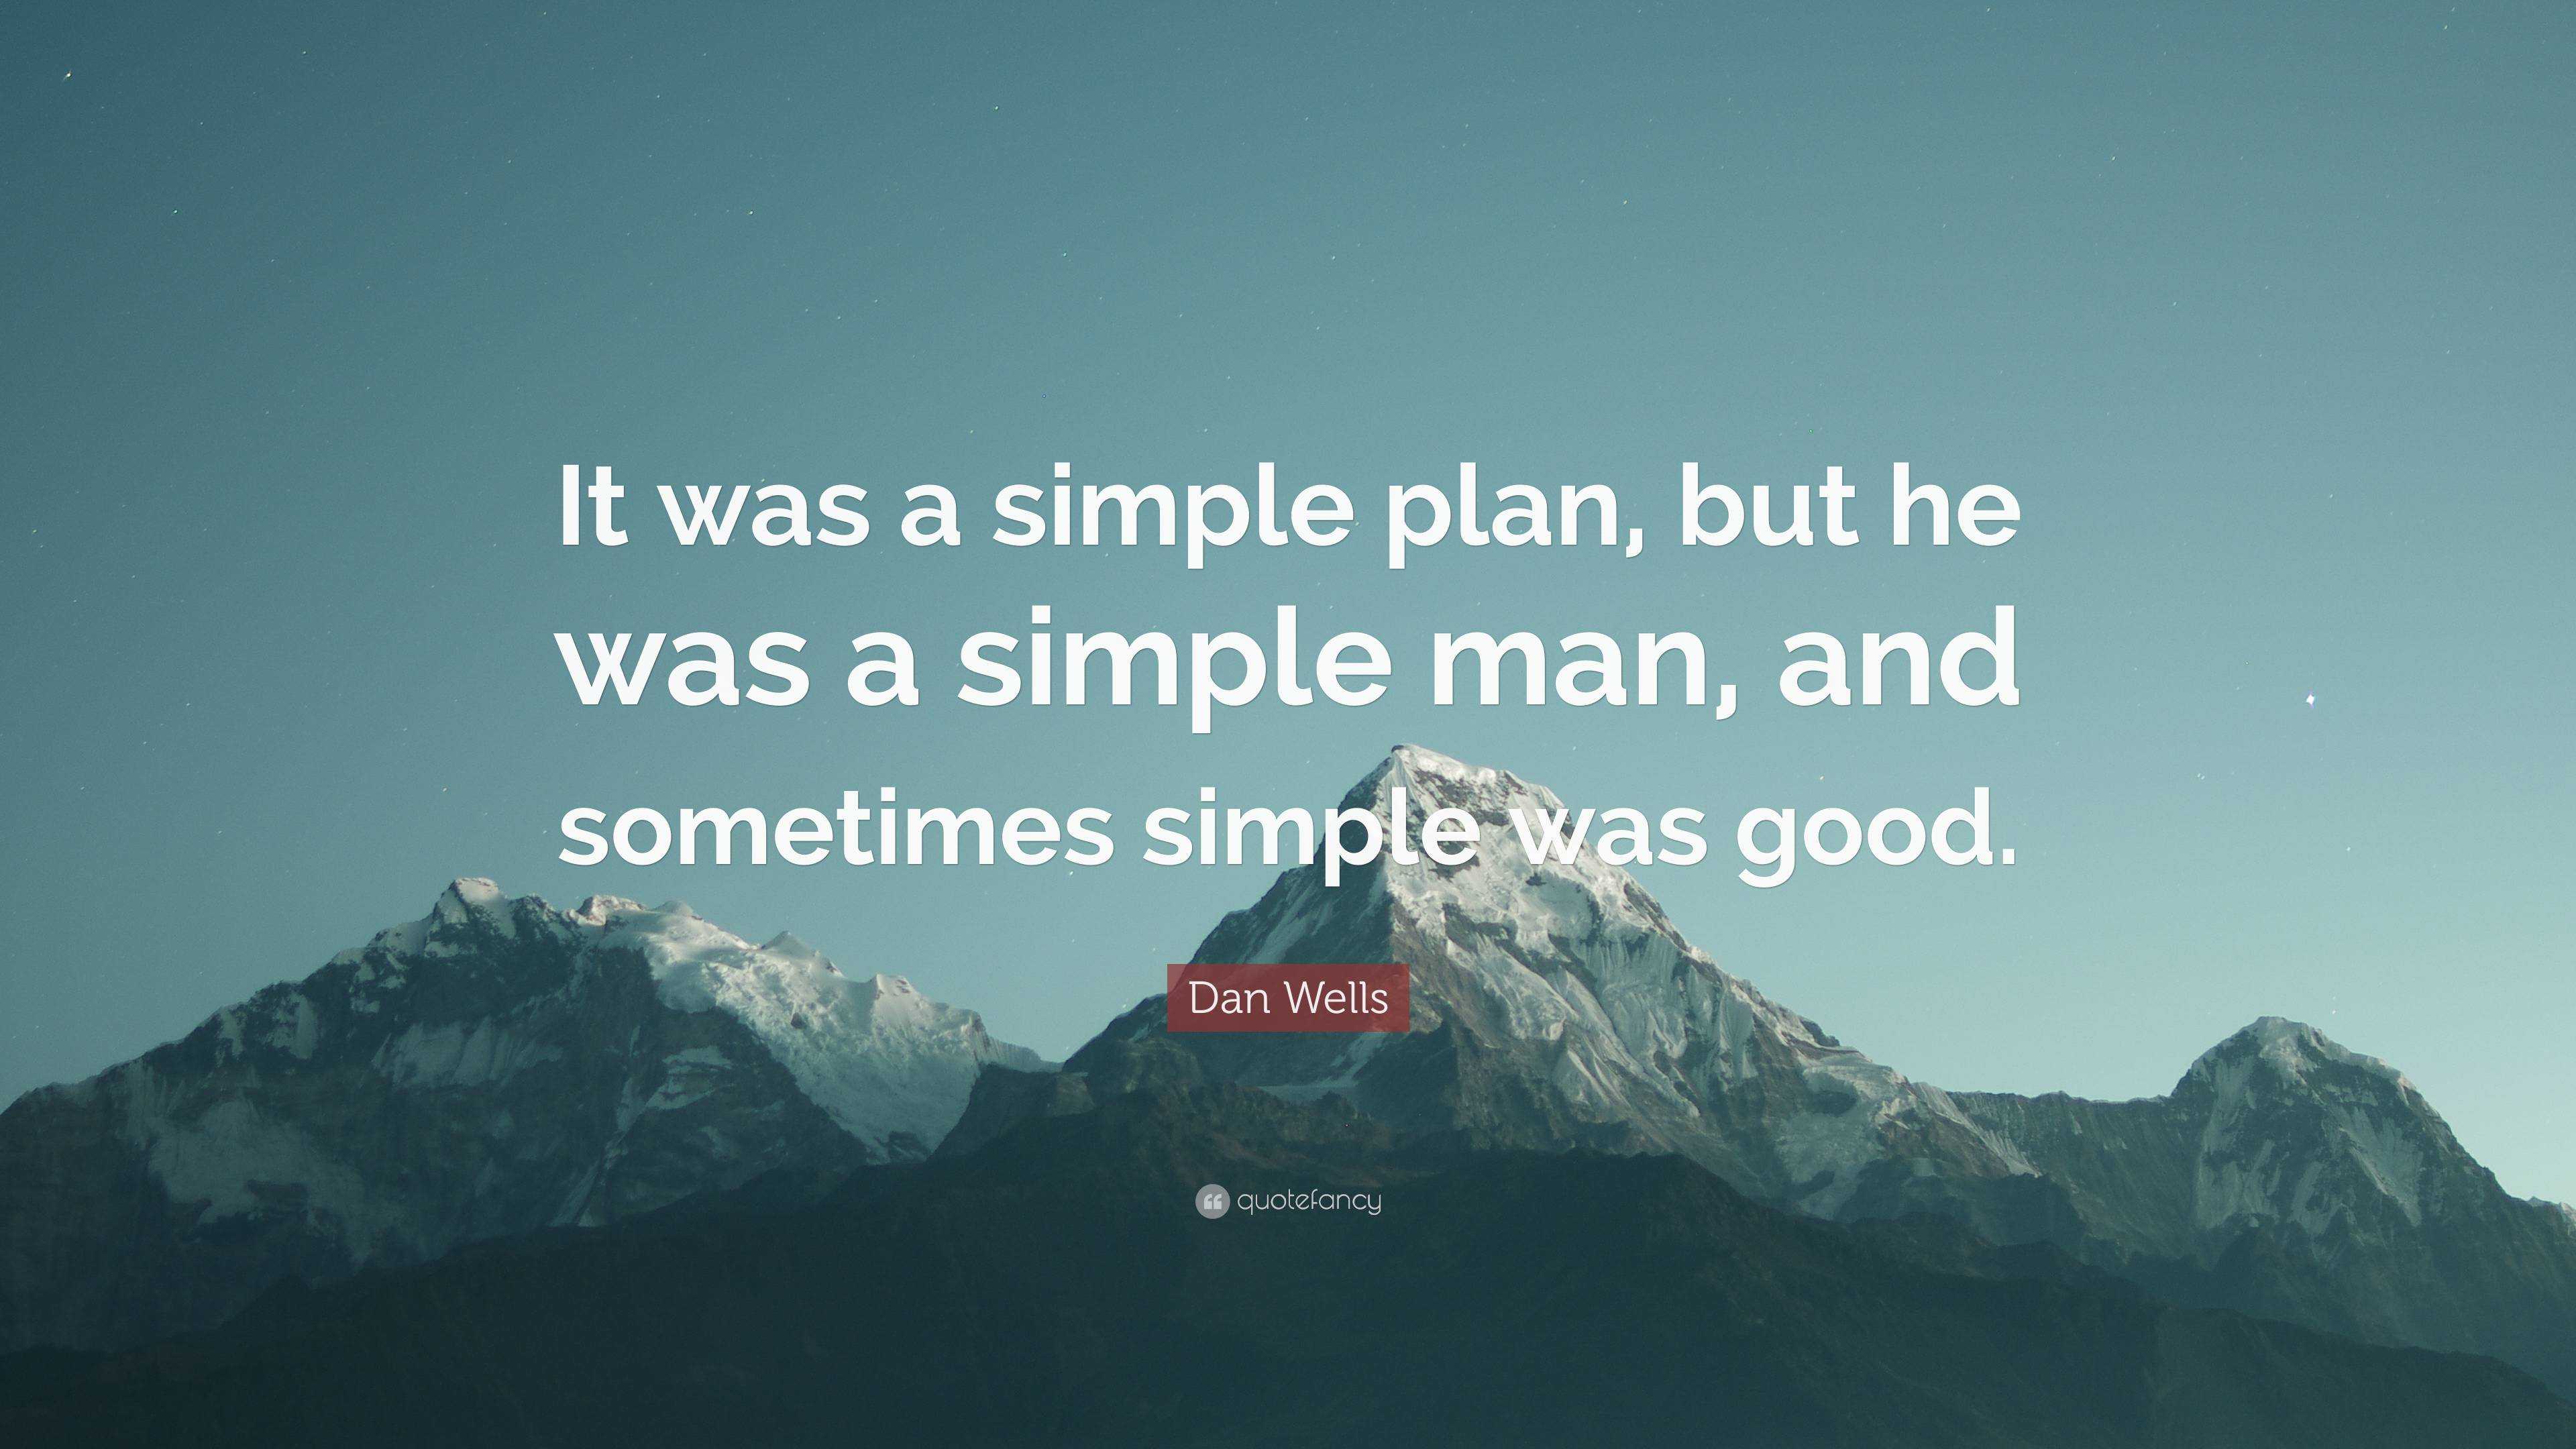 Dan Wells Quote: “It was a simple plan, but he was a simple man, and  sometimes